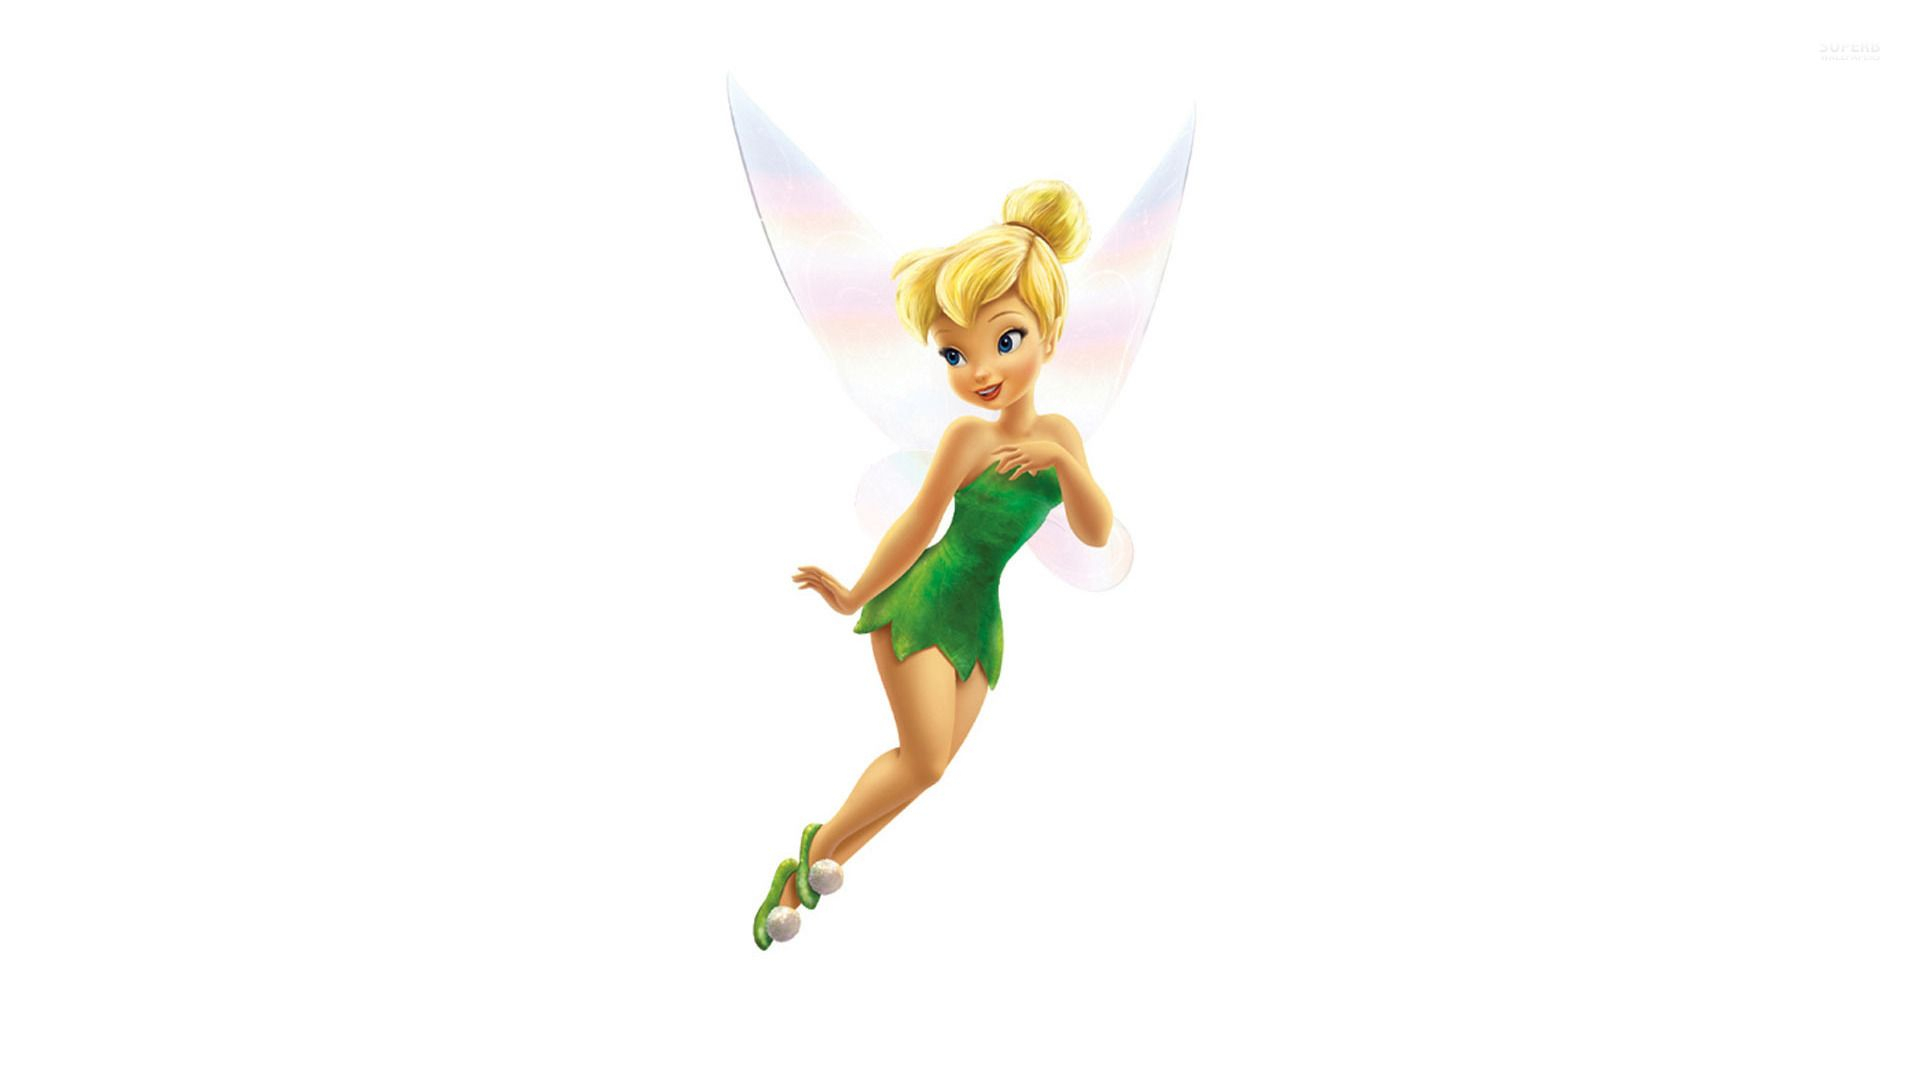 1920x1080 Tinkerbell pictures, Tinkerbell wallpaper, Tinkerbell